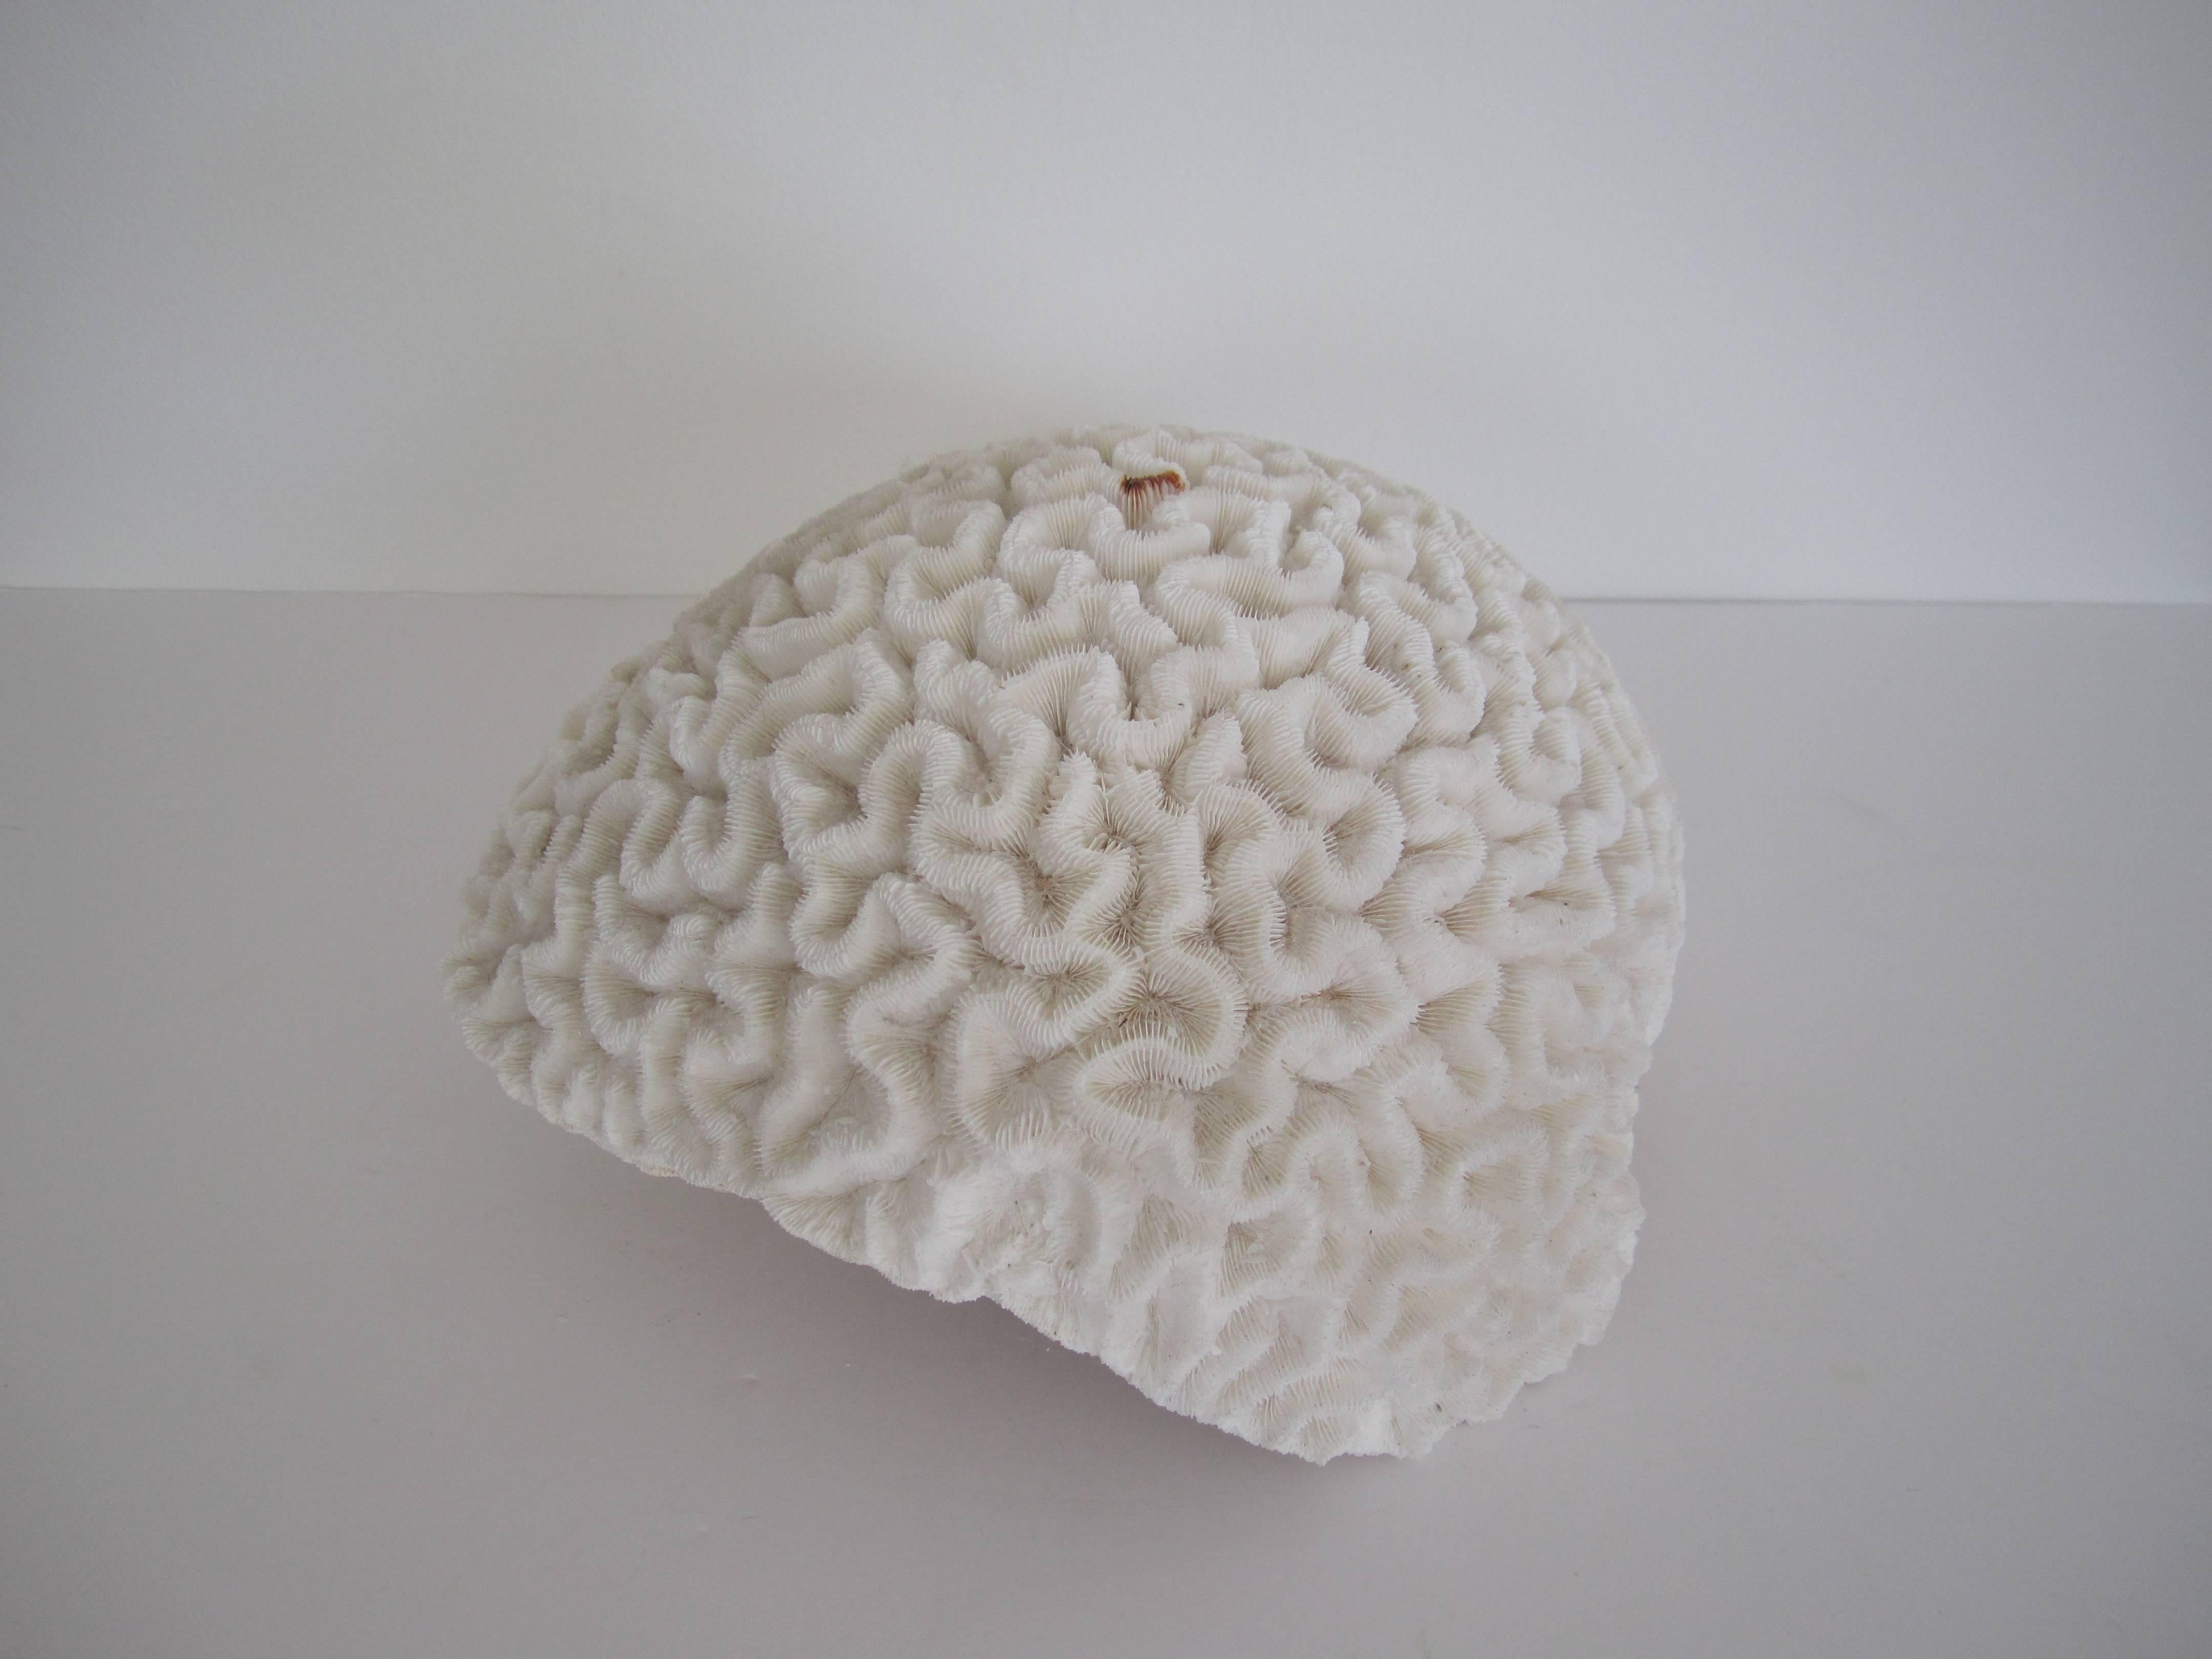 A large  and beautiful fragment of natural white brain coral. Beautiful as a standalone decorative object or centerpiece (see image #10), used with other seashells, or as a luxury display piece. 

Measurements include: 10 in. W x 8.5 in. D x 6 in.